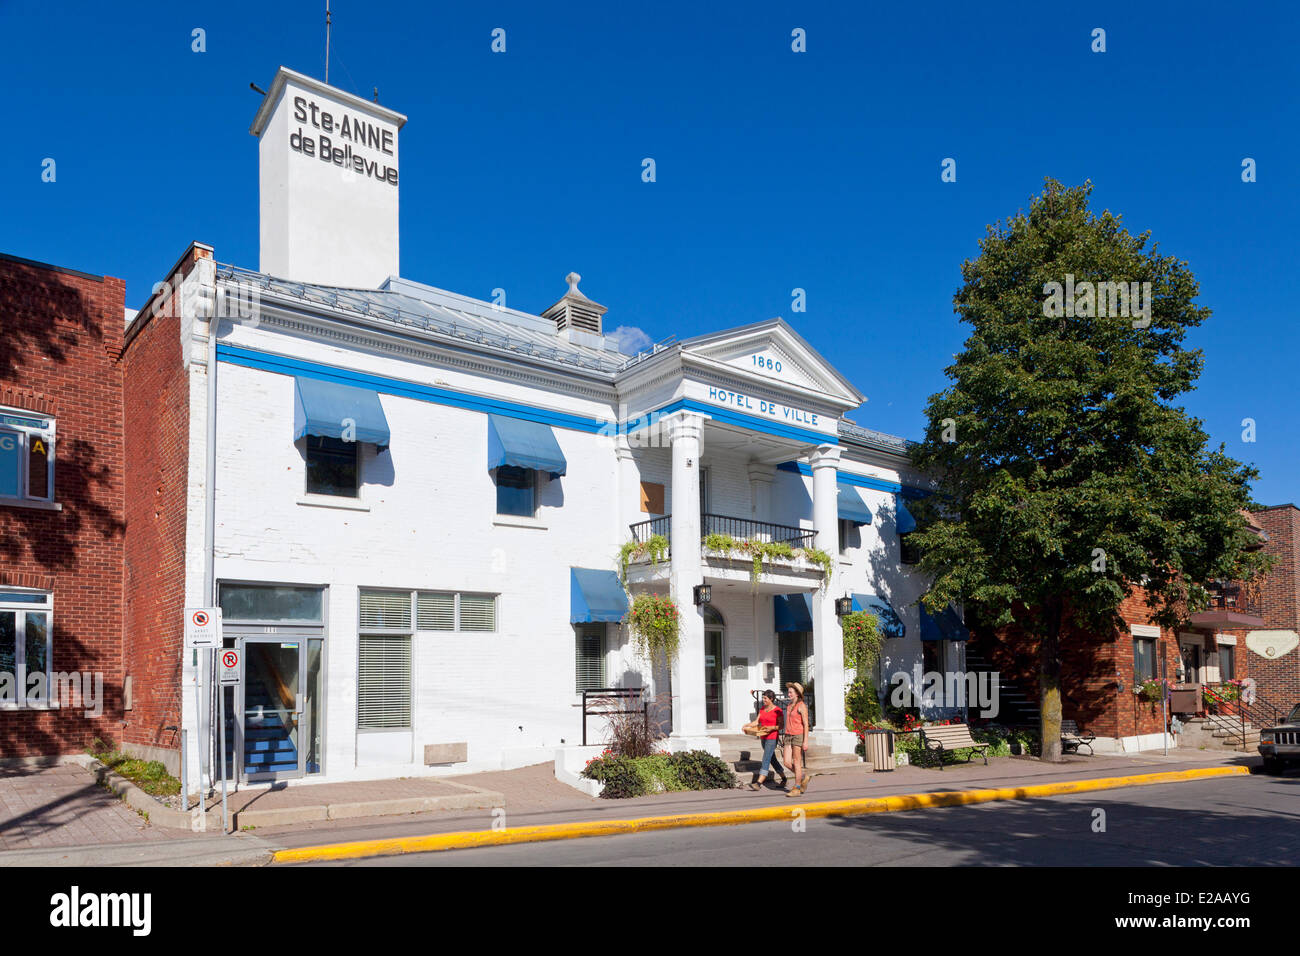 Canada, Quebec Province, Montreal, Sainte Anne de Bellevue, the city hall in a former fire station Stock Photo